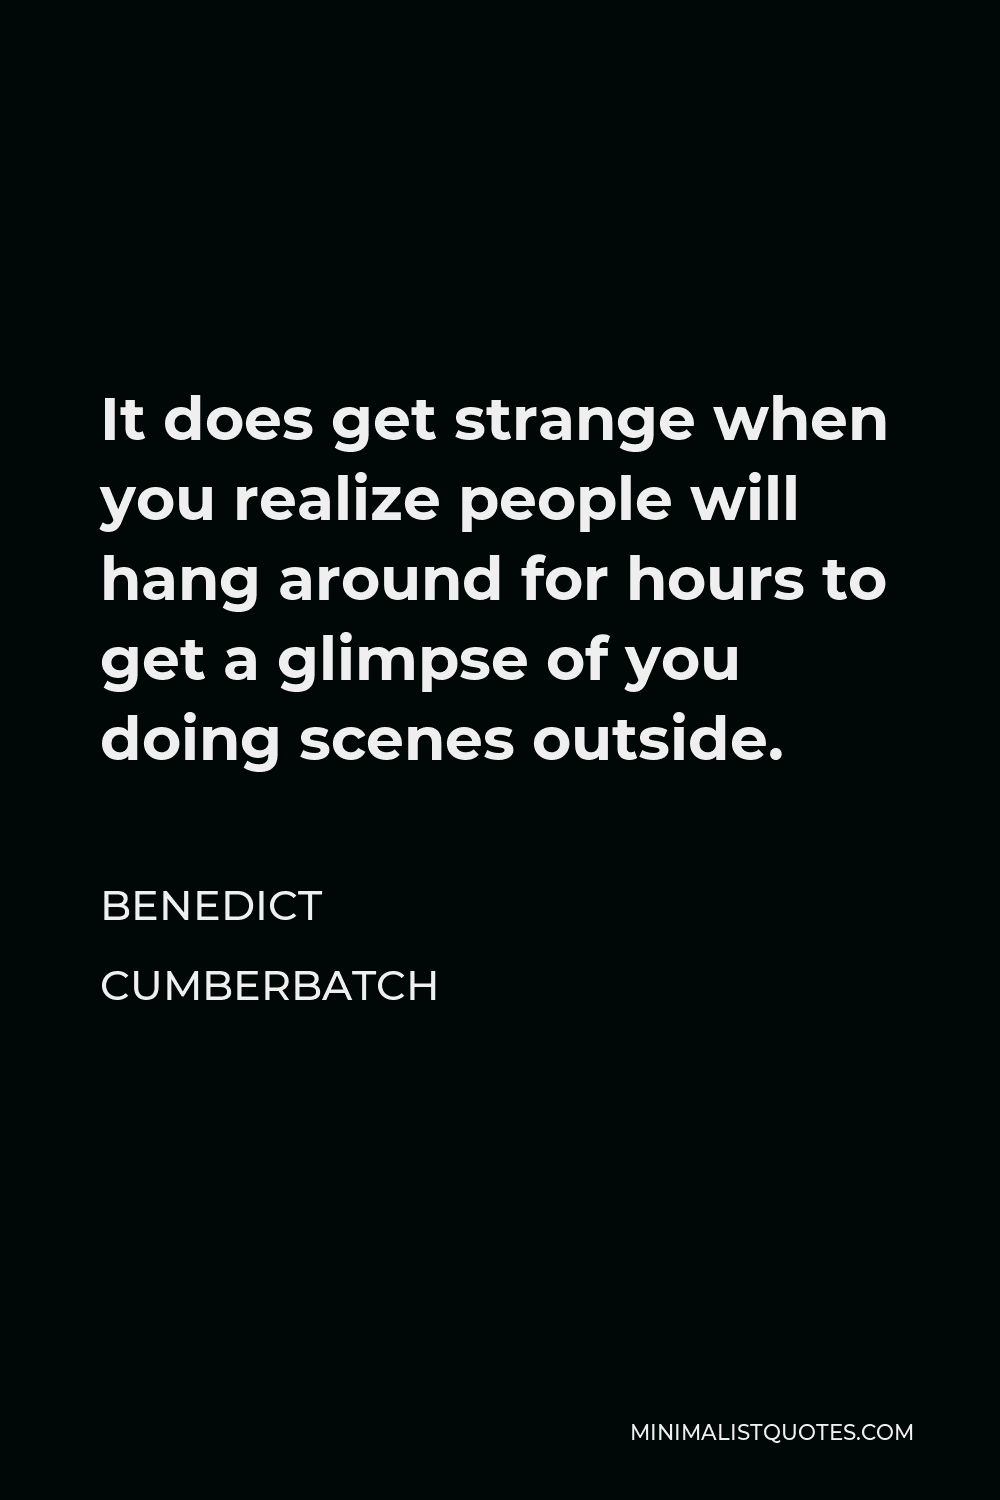 Benedict Cumberbatch Quote - It does get strange when you realize people will hang around for hours to get a glimpse of you doing scenes outside.